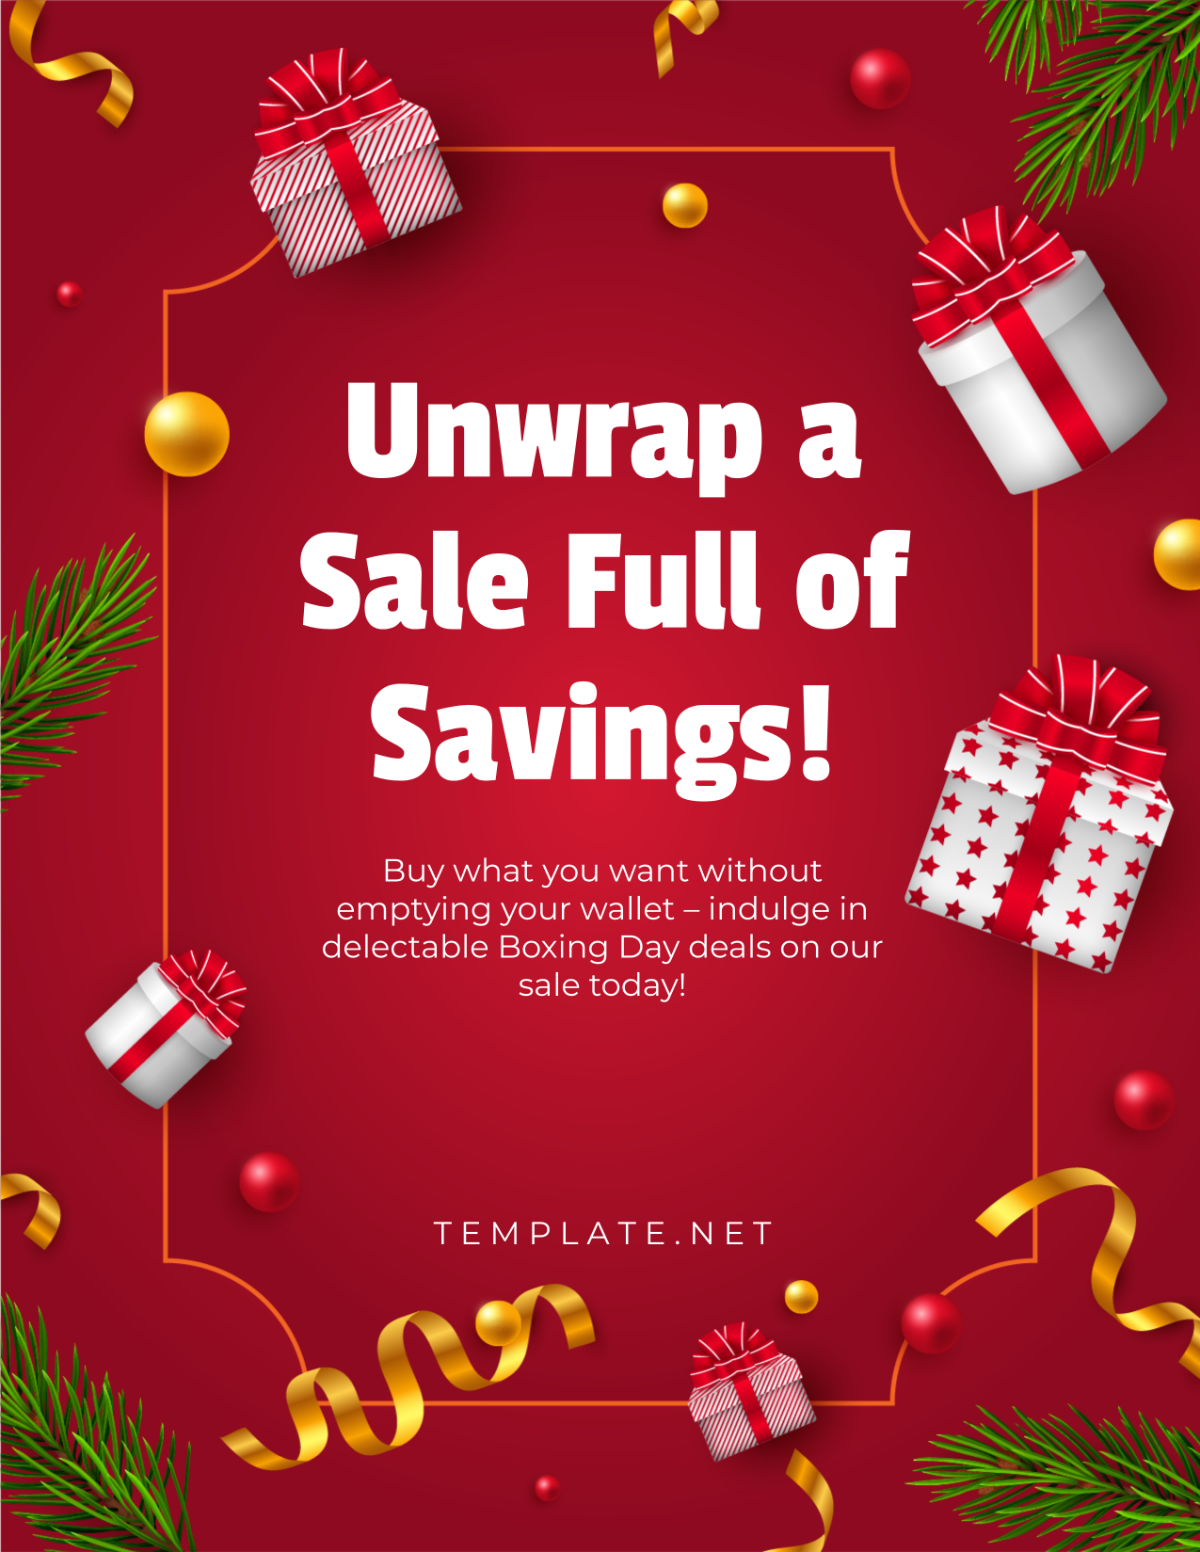 Boxing Day Sale Deals Template